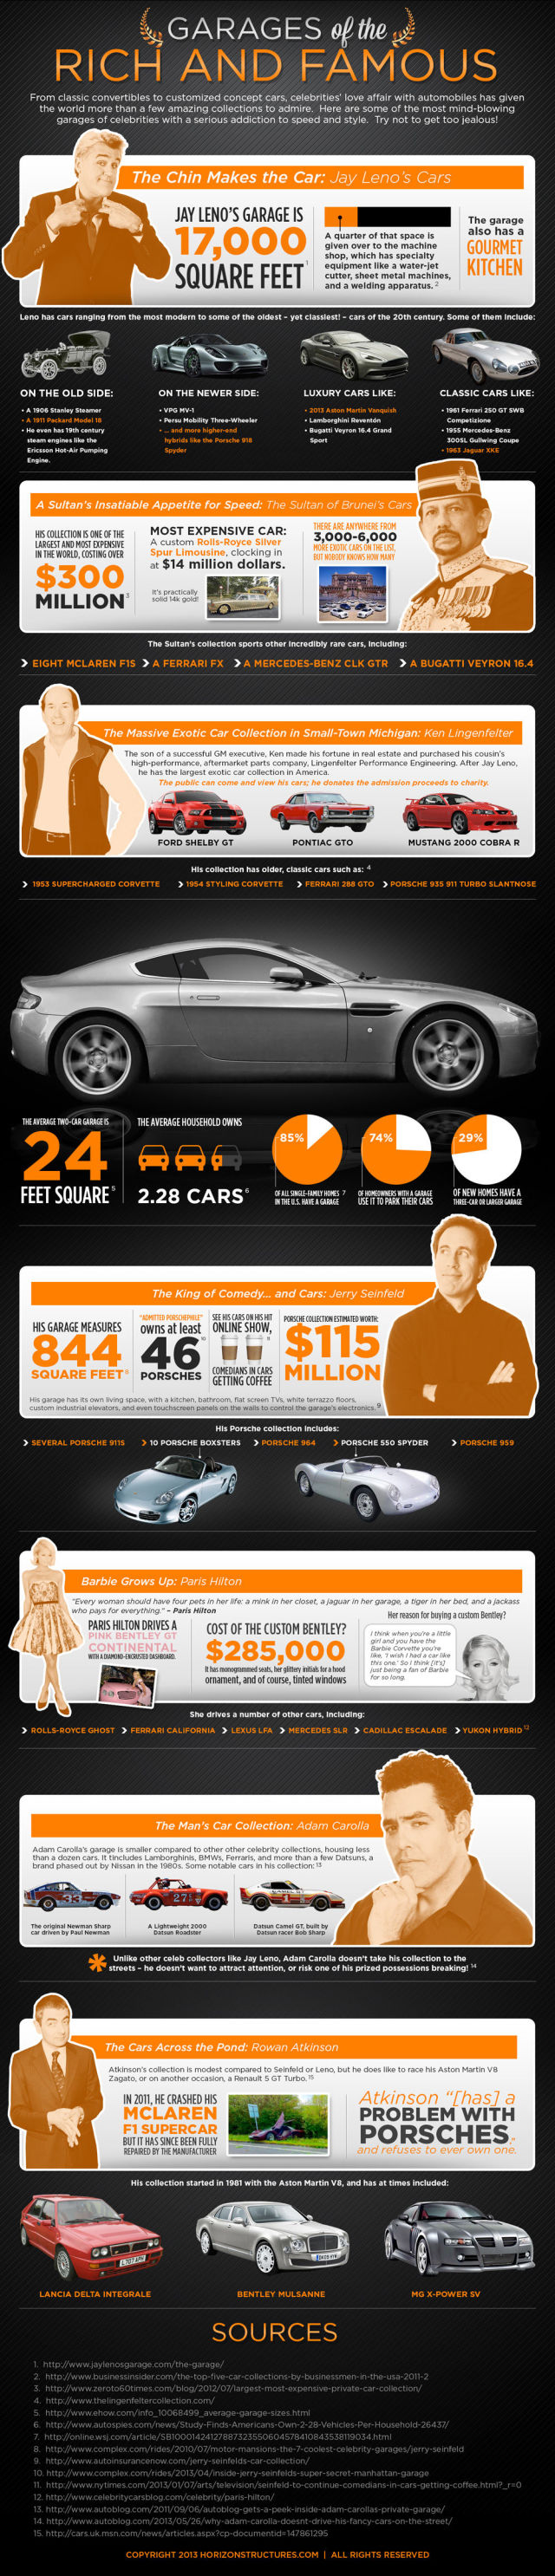 An Infographic of Rich People’s Car Collections